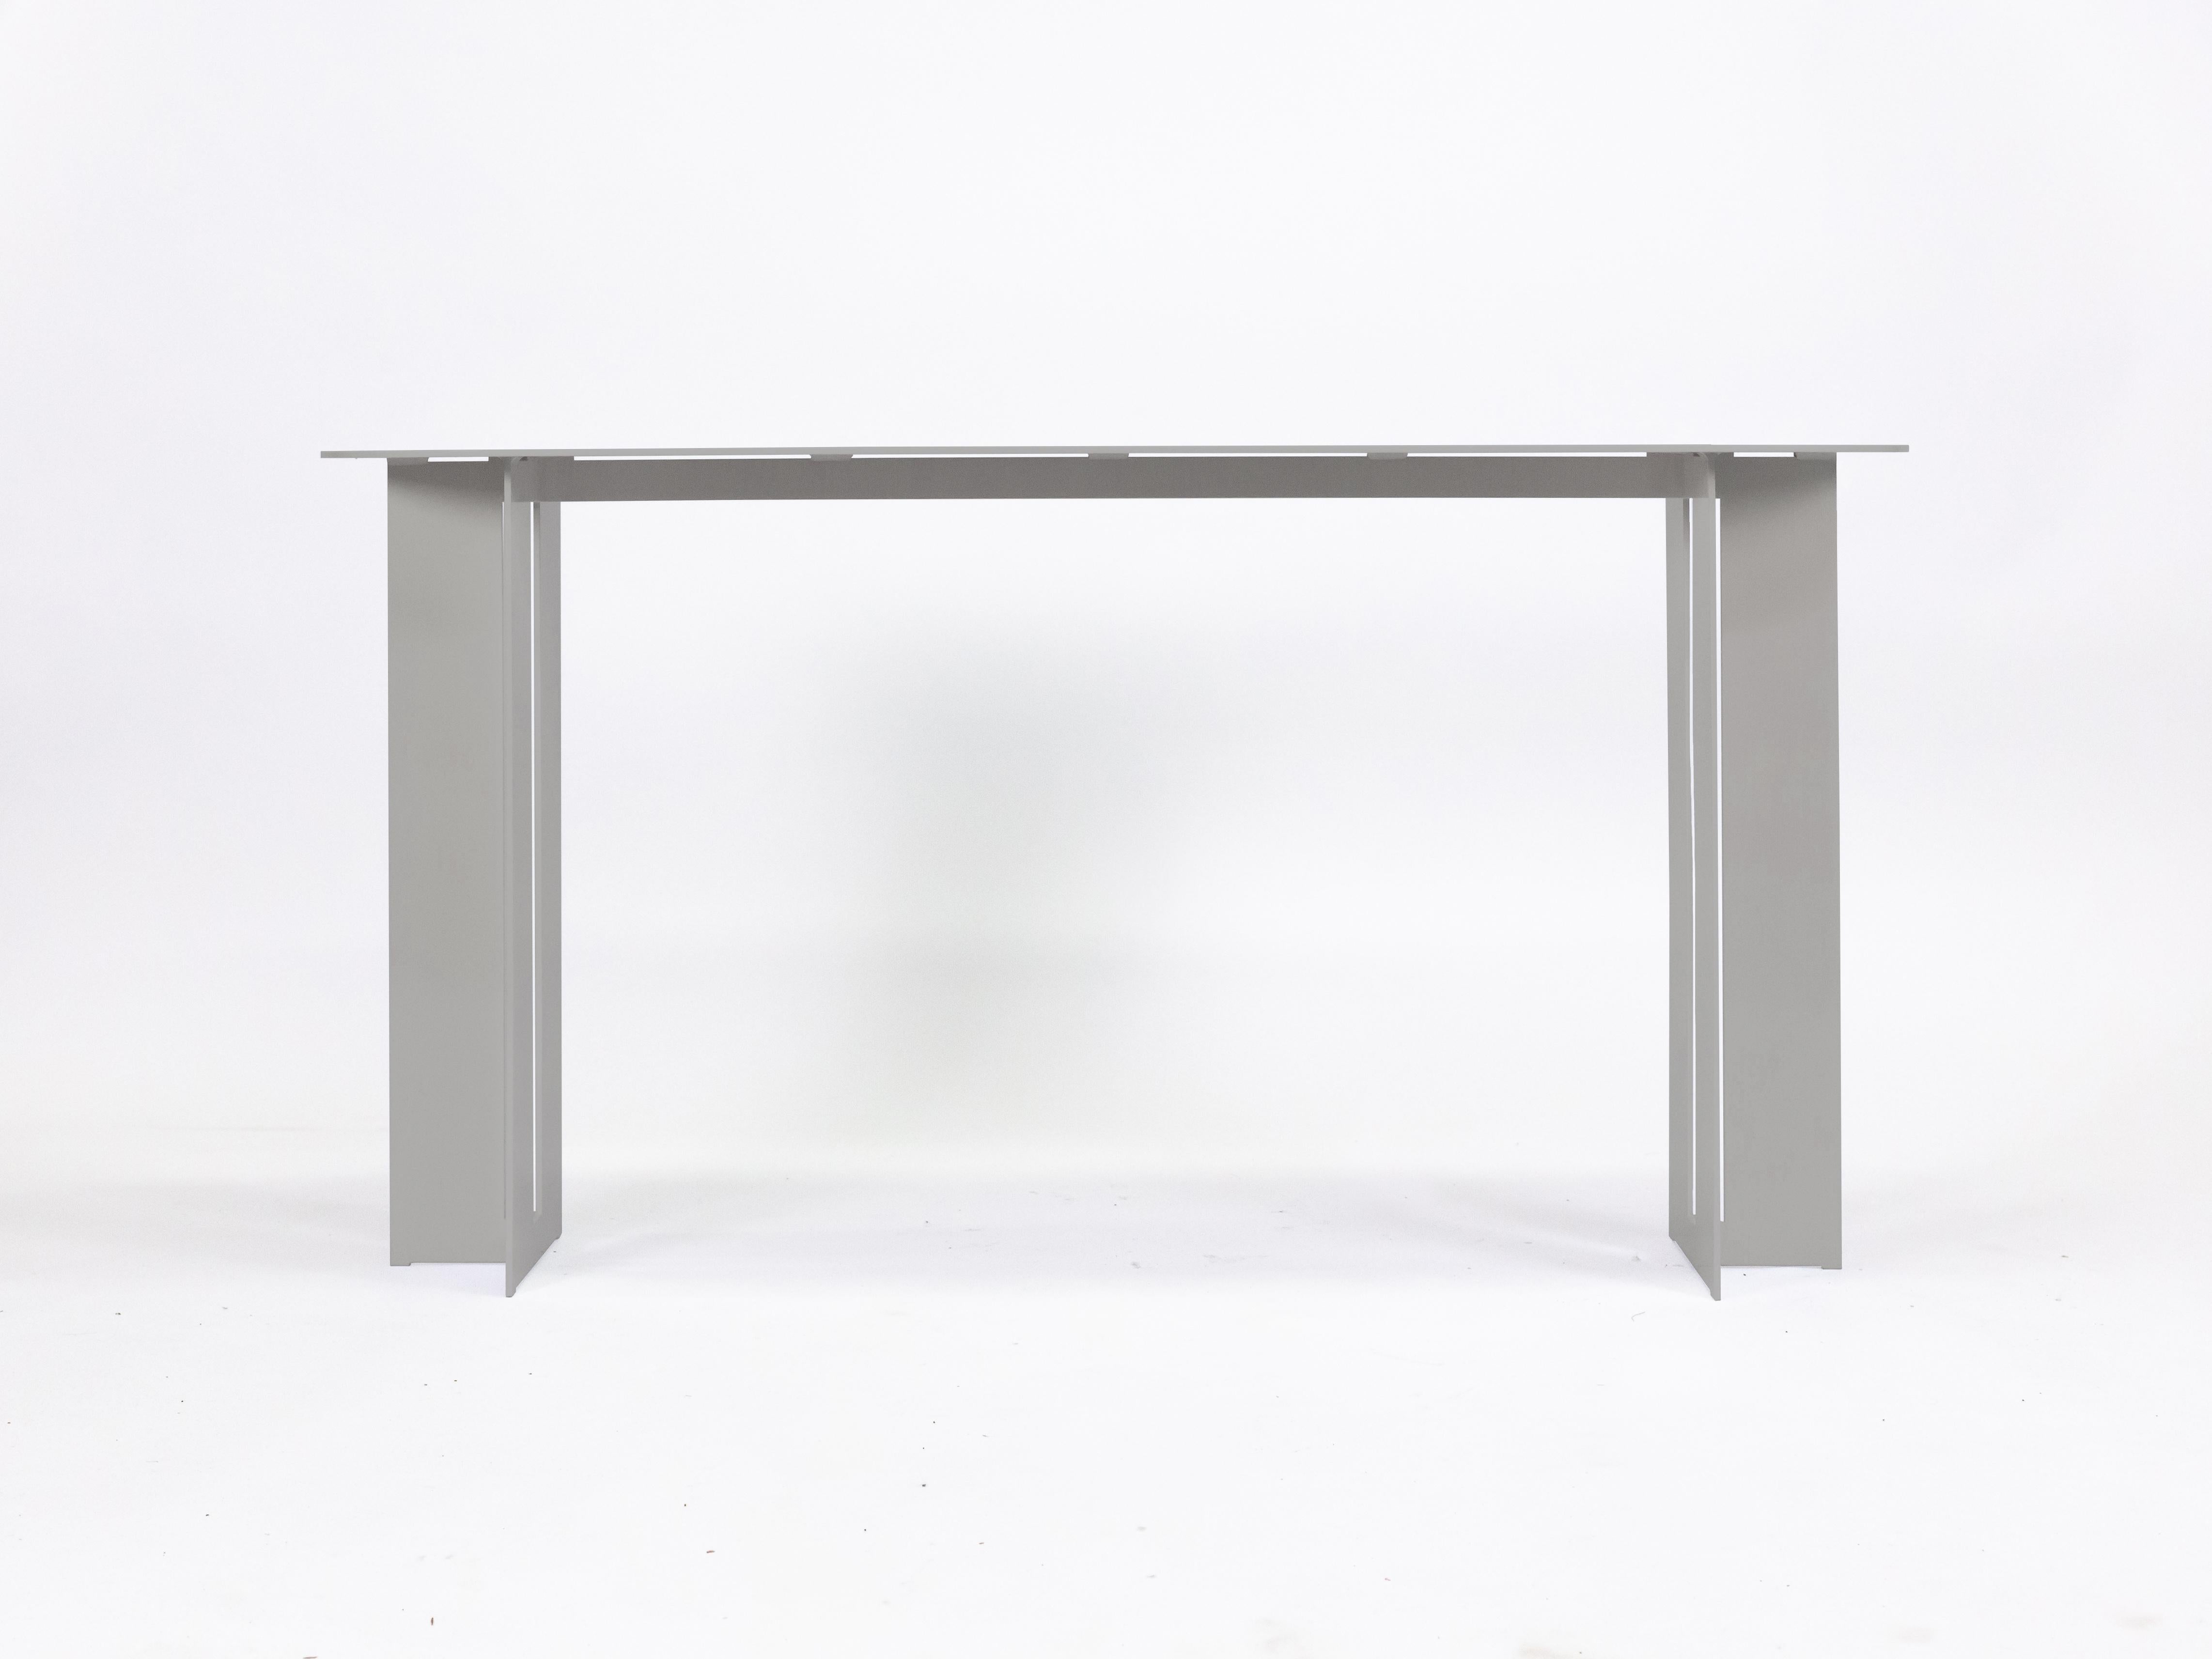 The Mers console table is fabricated from solid aluminum and is suitable for use indoors and out. Form is inspired by the simple utilitarianism of West Coast aluminum fishing boats.

Shown in aluminum with satin finish.
Custom sizing and powdercoat